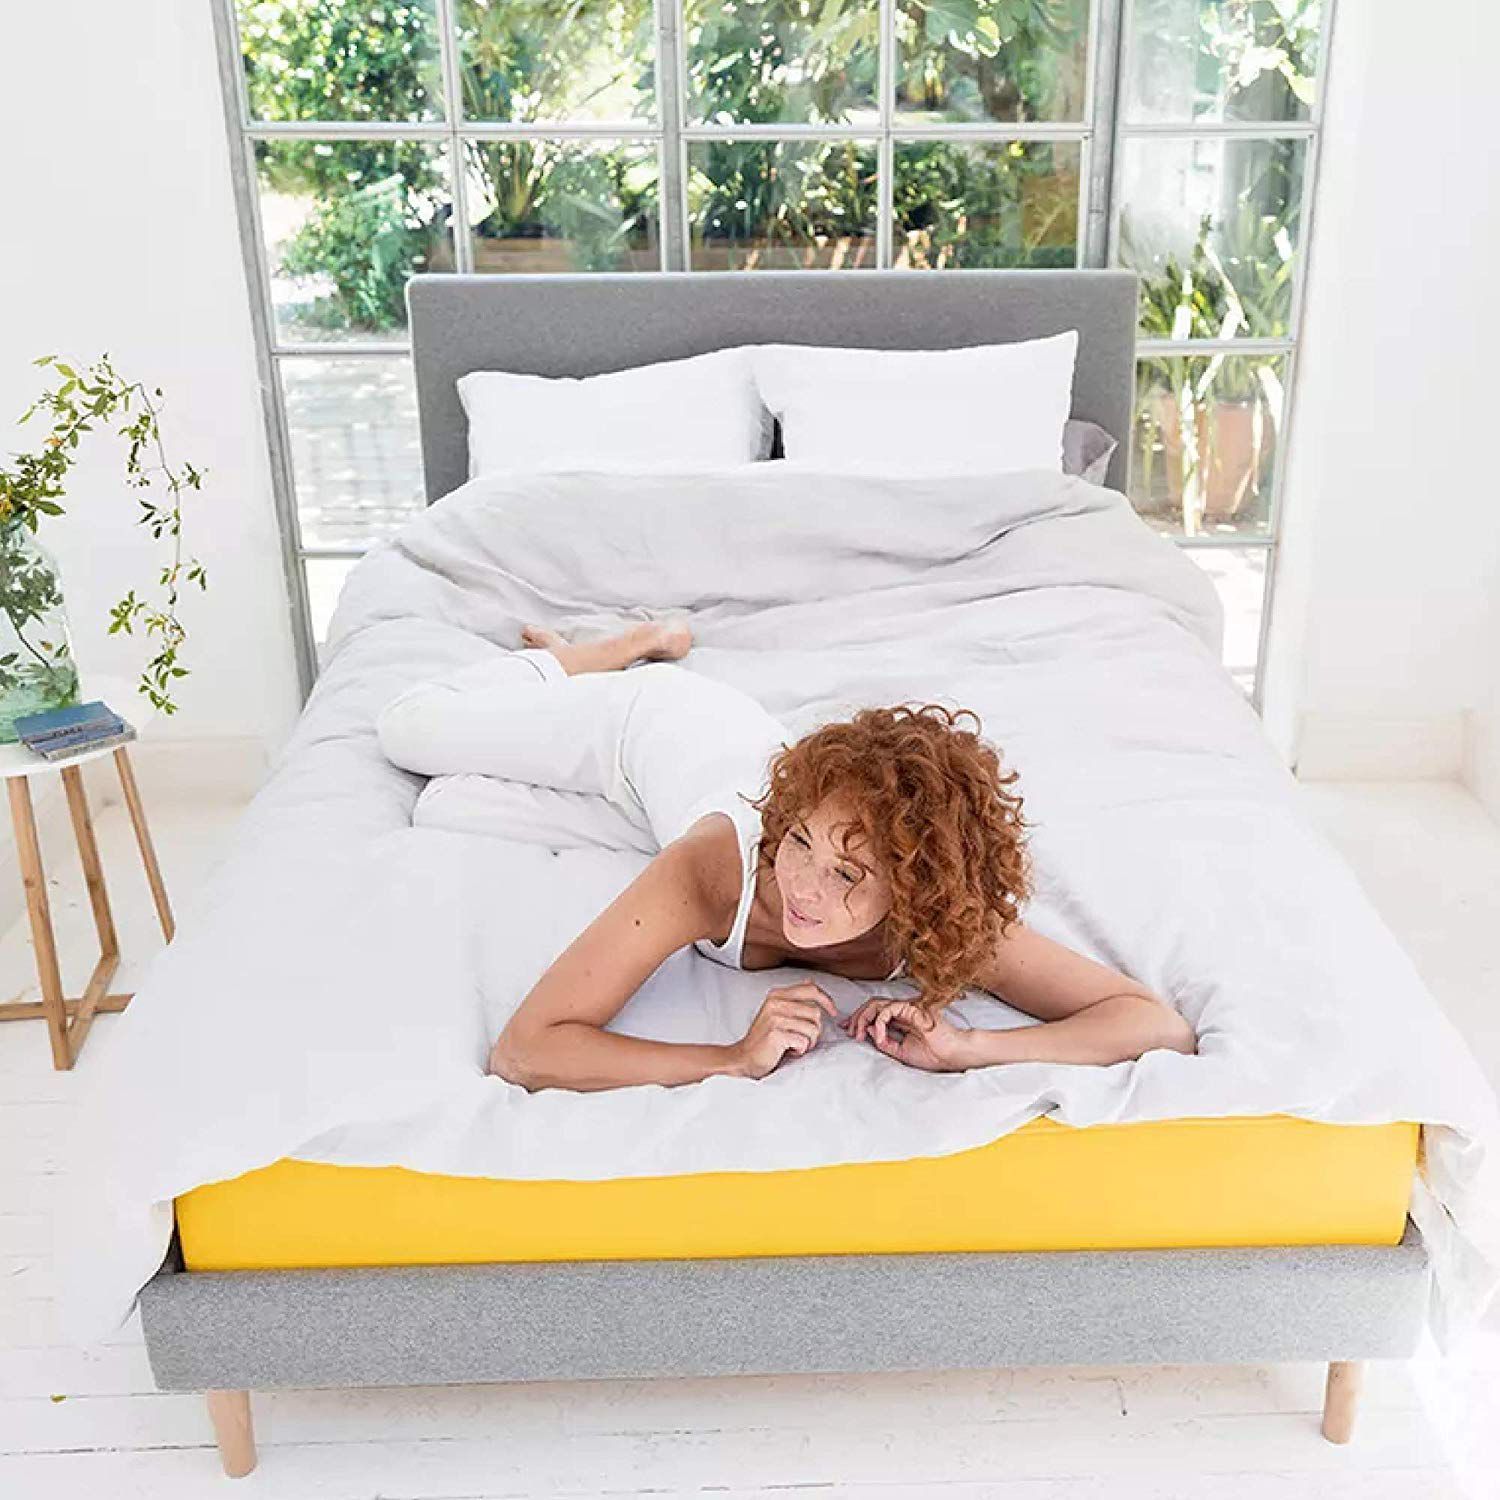 The Eve Sleep mattress our experts rate is a Prime Day bargain